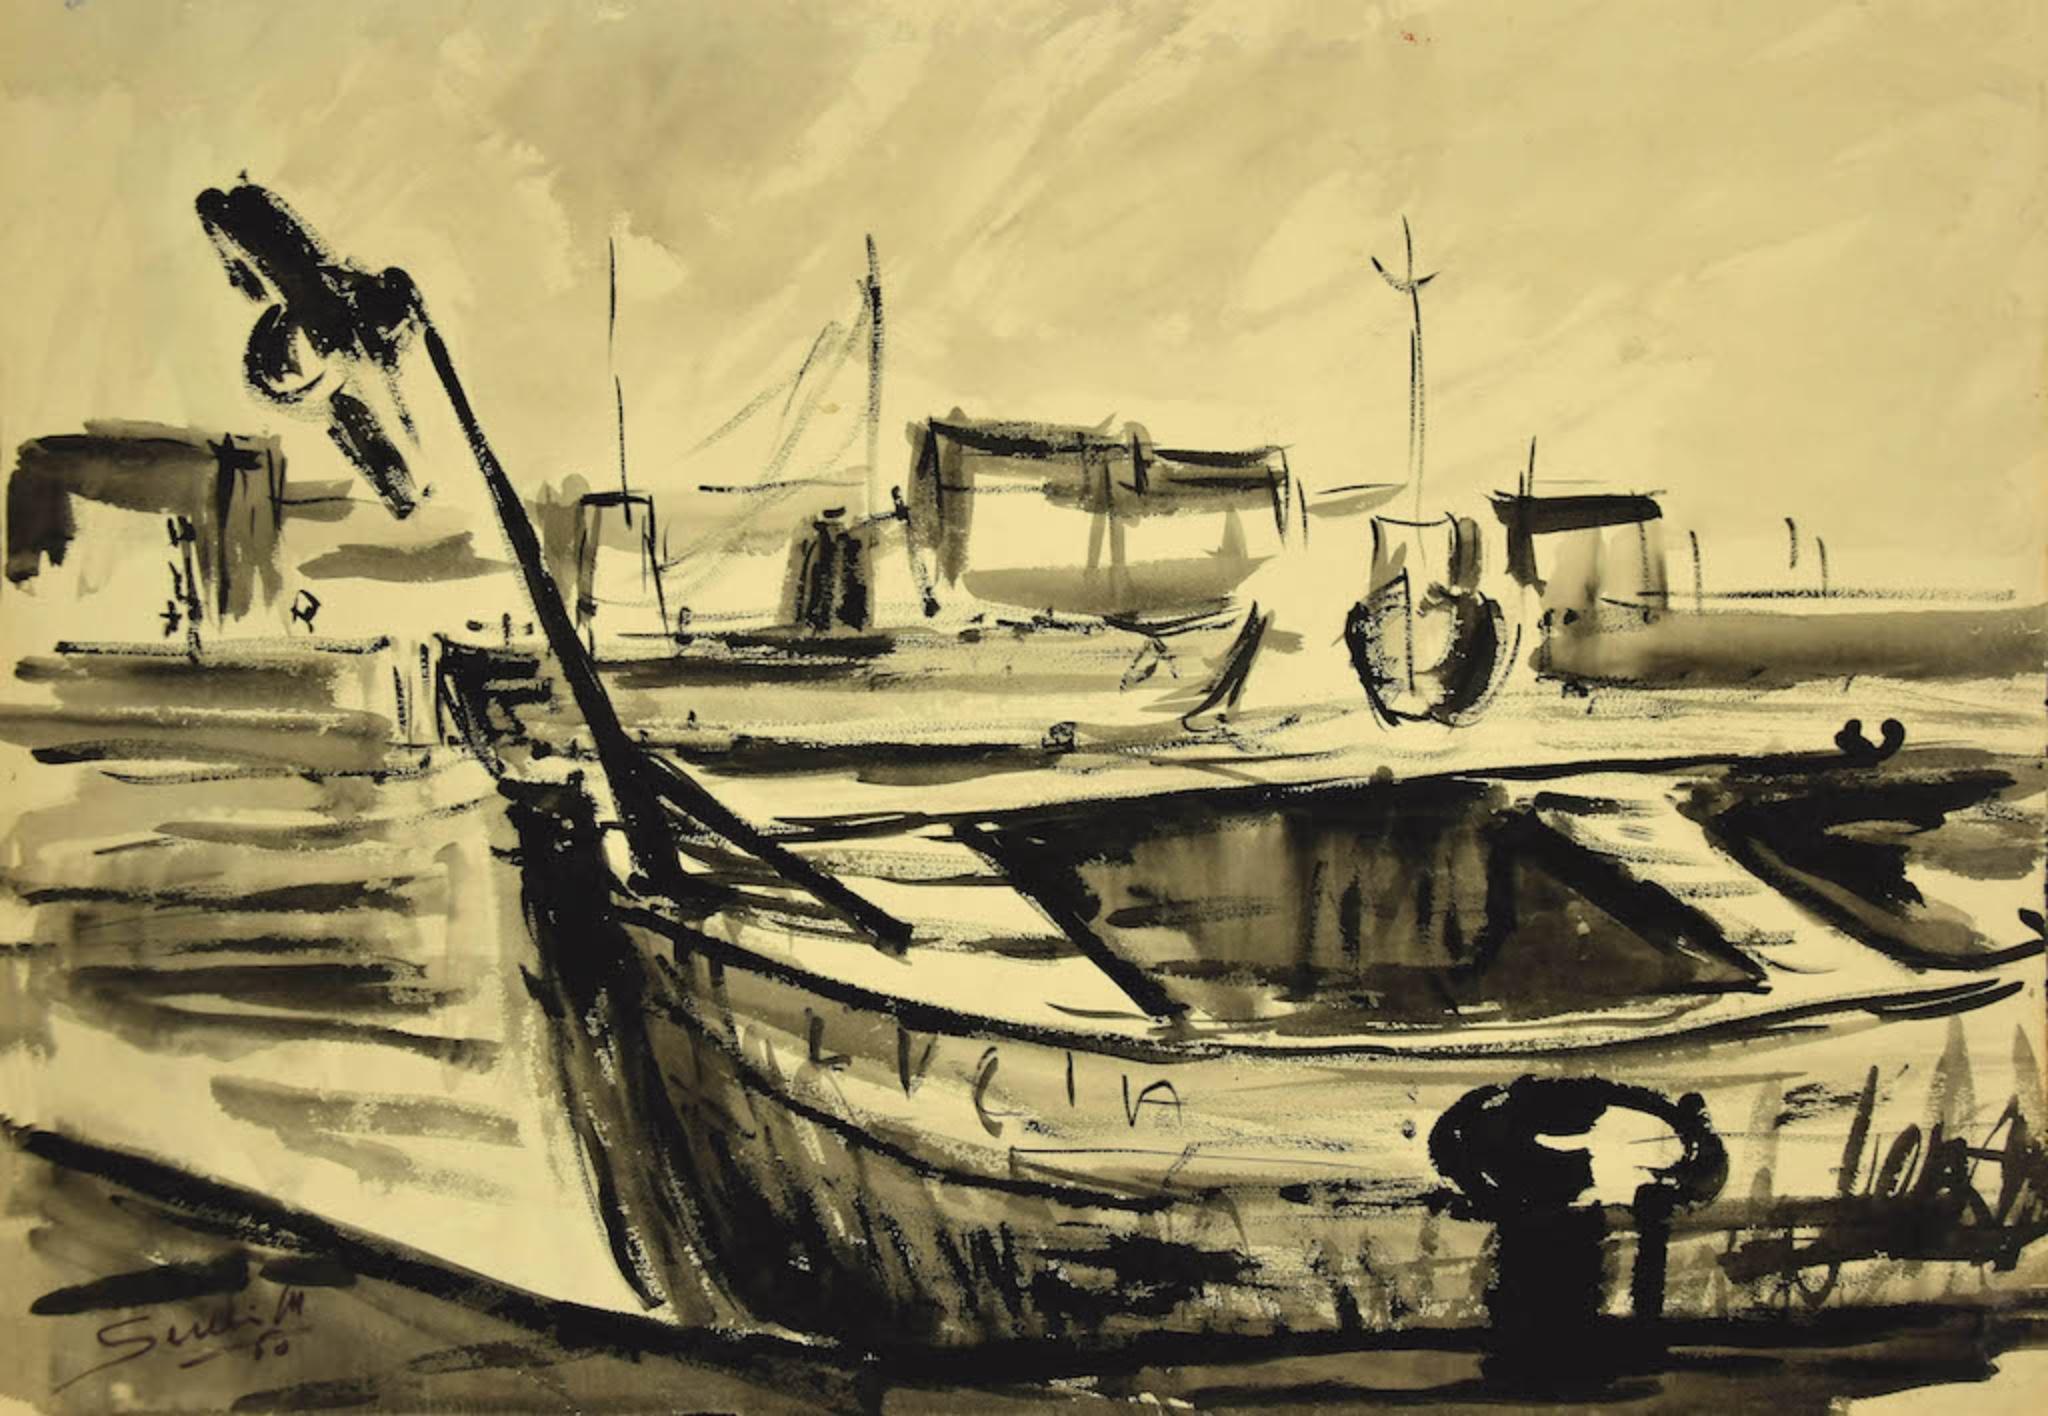 Boats -  China Ink and Watercolor by Luigi Surdi - Mid 20th century